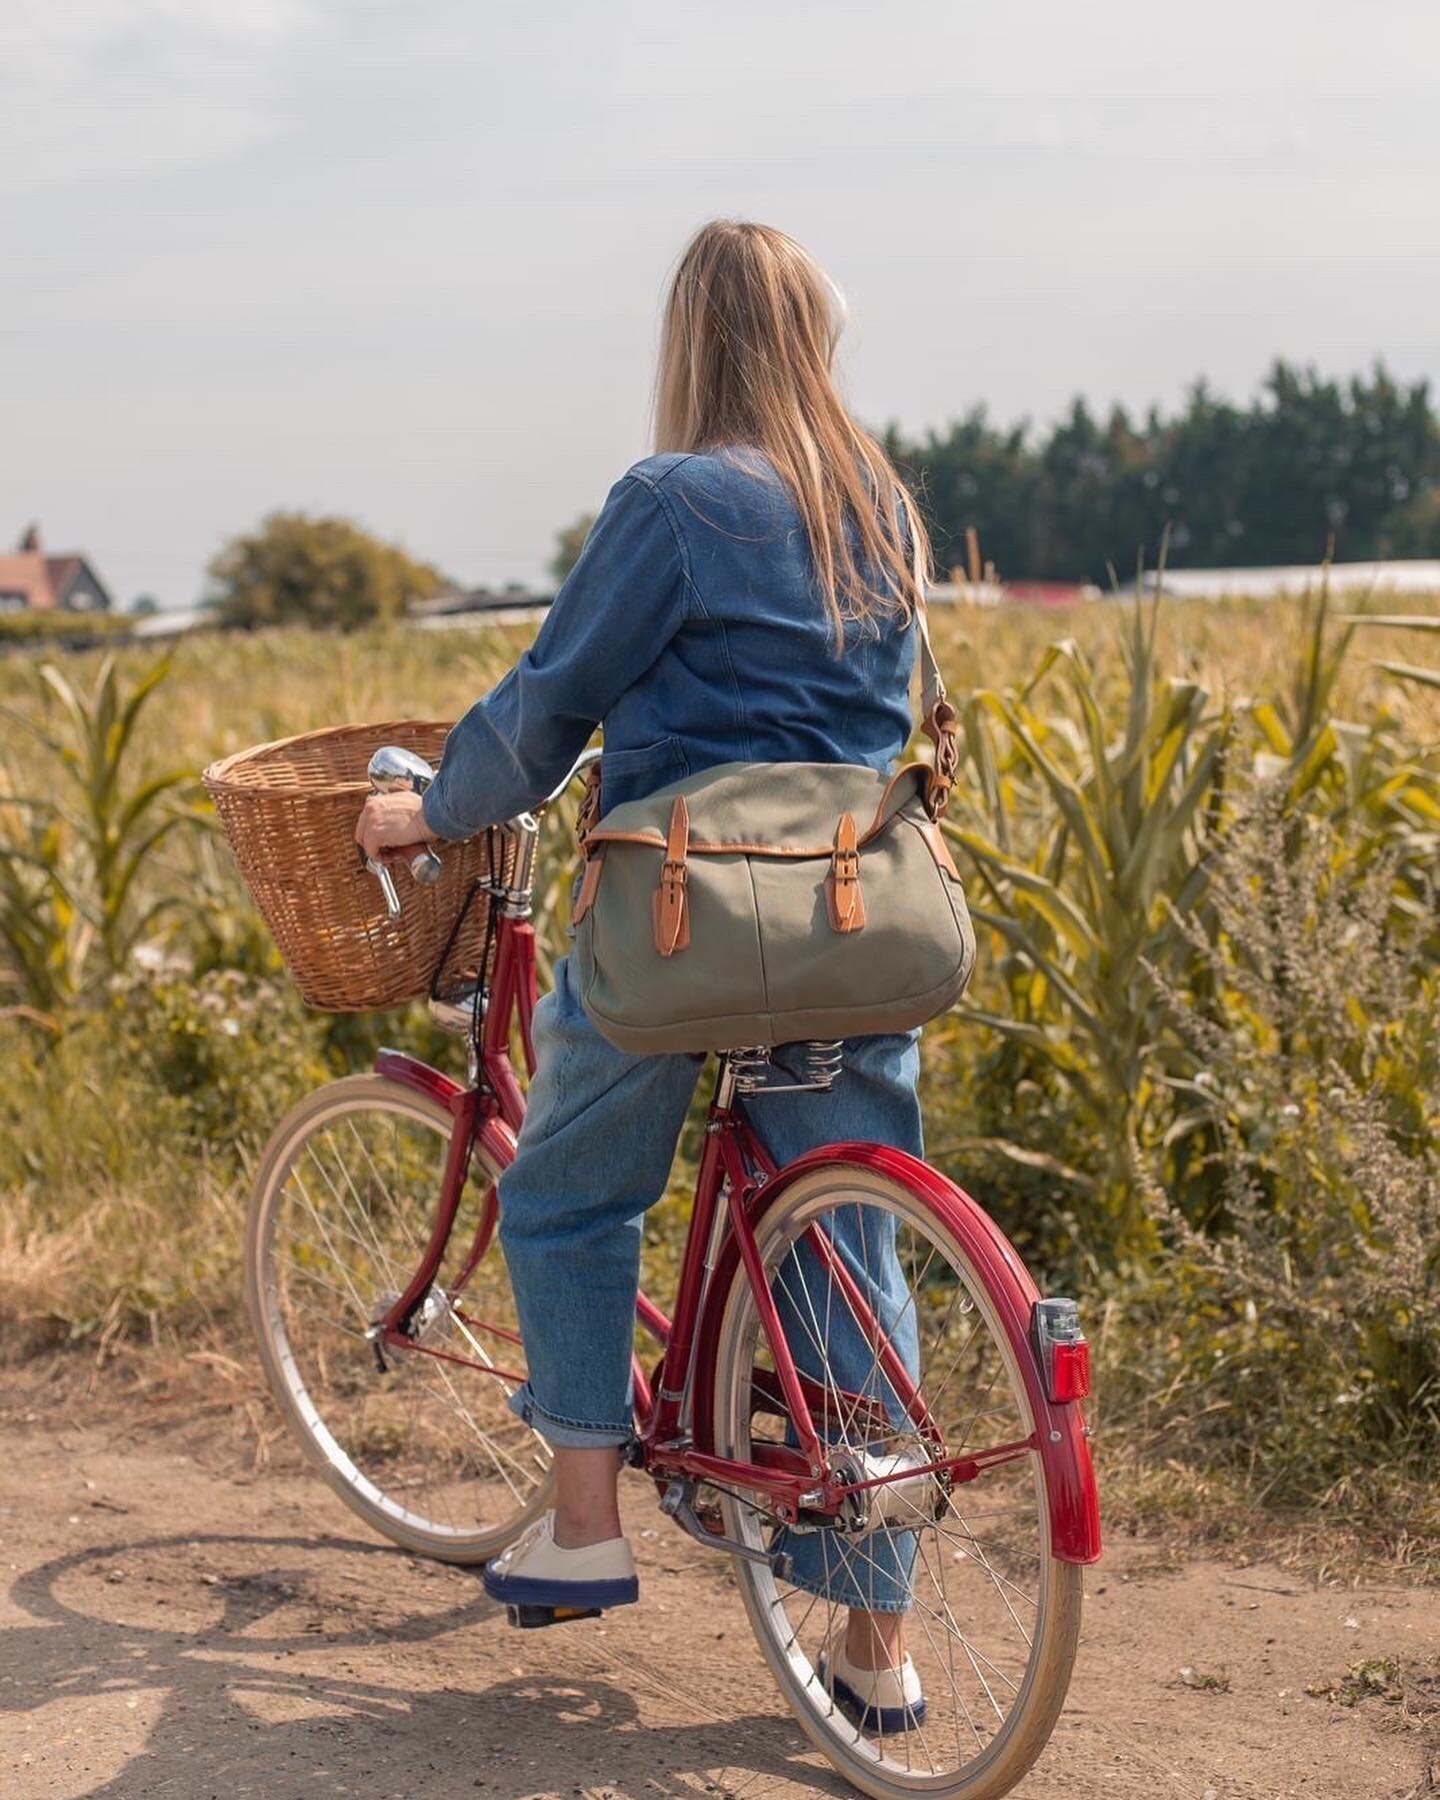 RODE TO THE CORN FIELD ON MY PASHLEY!
WEARING MY NEW MUSETTE BAG. 
THE MUSETTE BAG IS MADE IN FRANCE &amp; G.O.T CERTIFIED ( GLOBAL ORGANIC TEXTILE STANDARD FOR ORGANIC FIBRES ) @bleudechauffe #madeforlife 
🎞 @kipkat 

#bleudechauffe #fishermanmuset